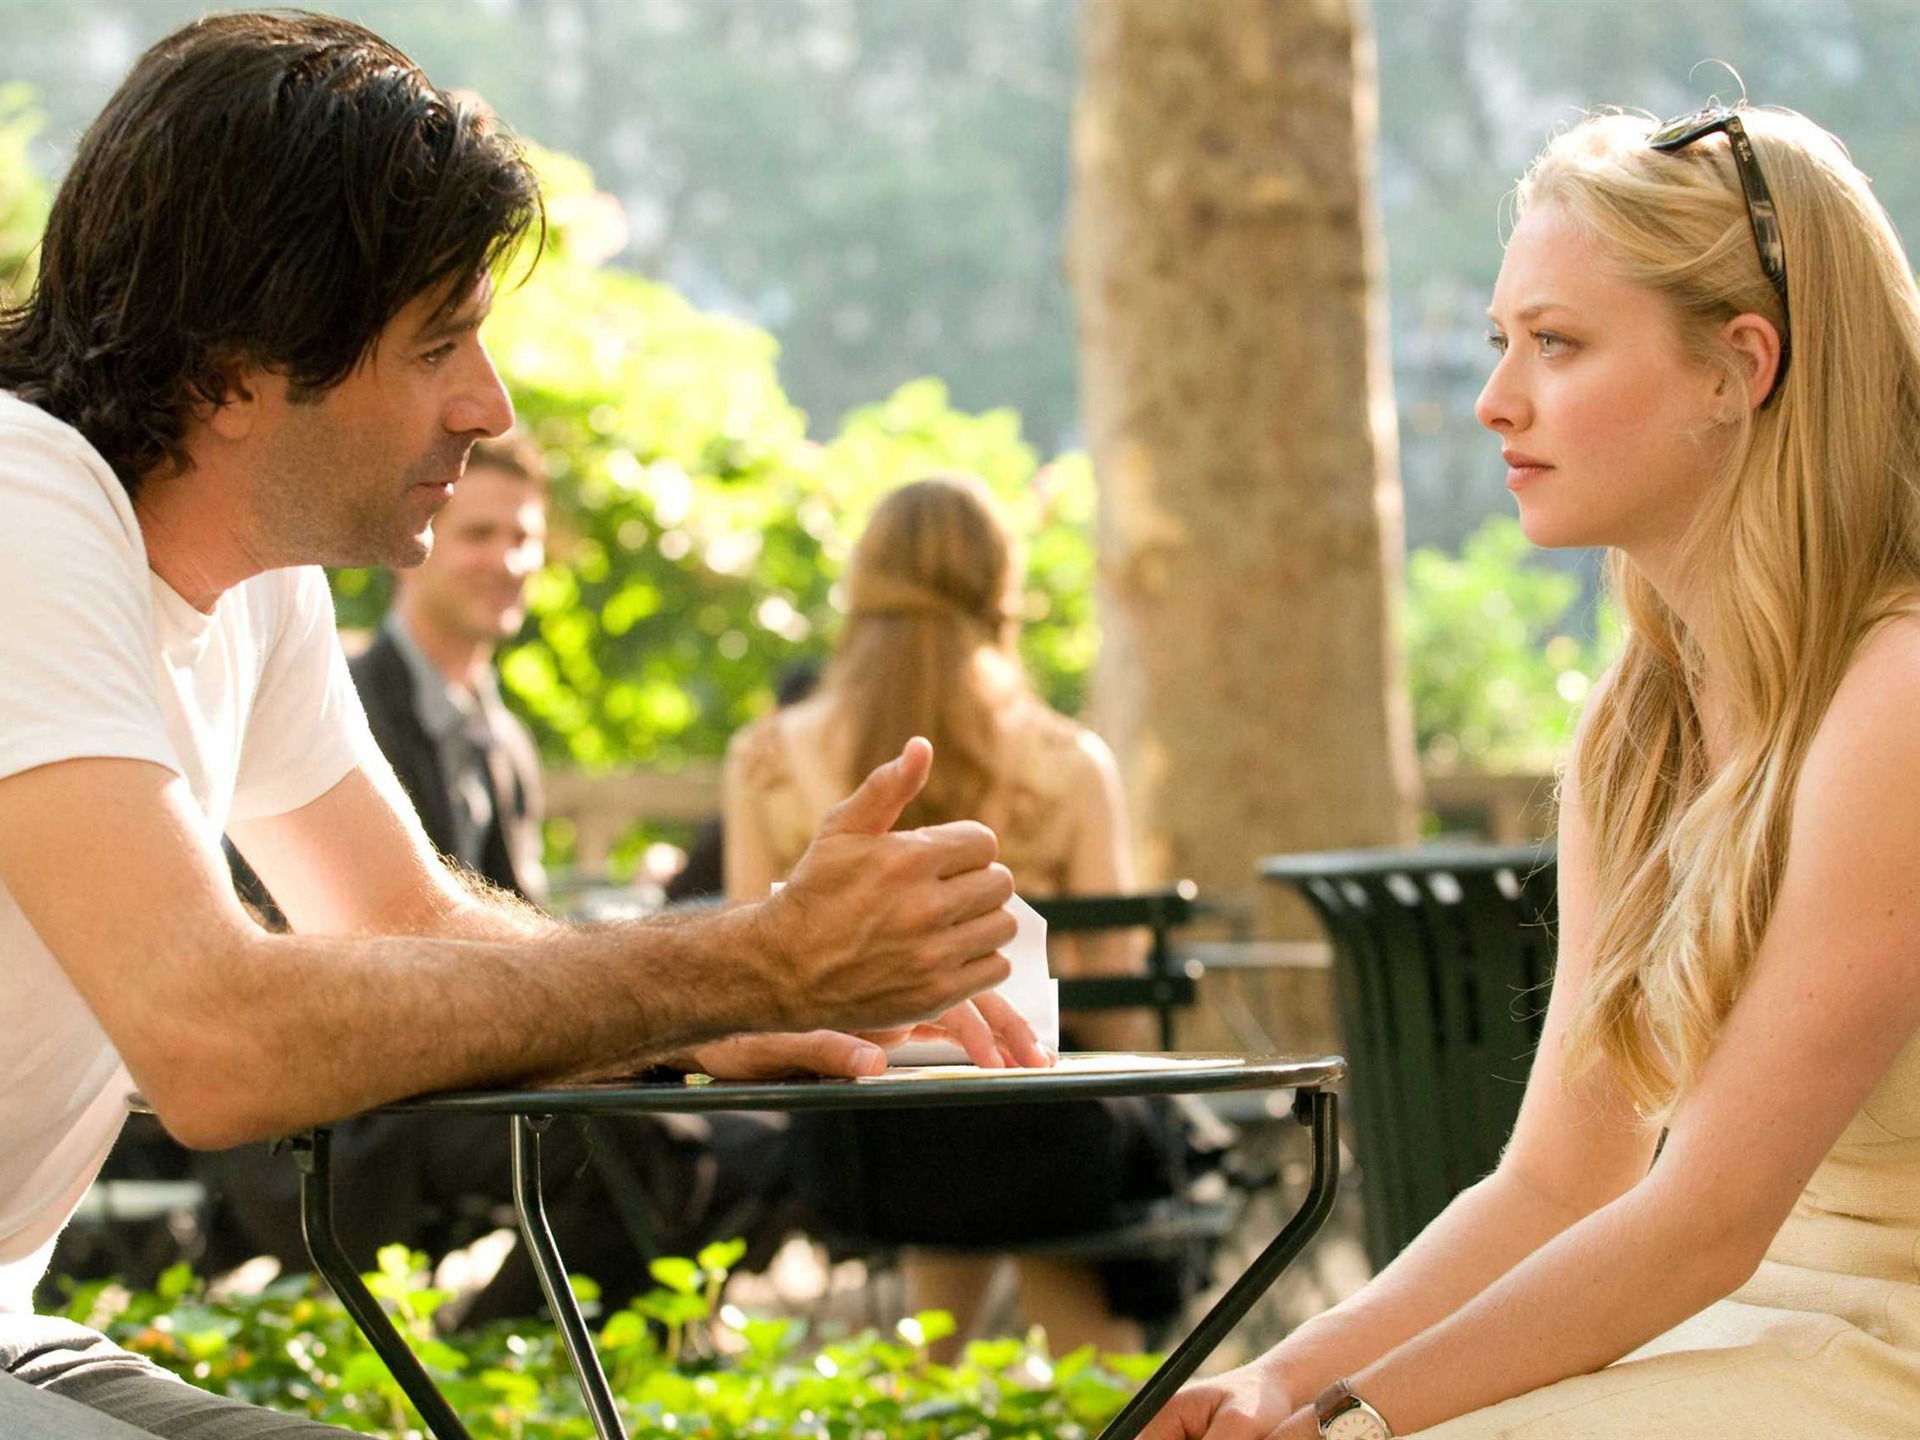 Letters to Juliet 给朱丽叶的信 高清壁纸19 - 1920x1440